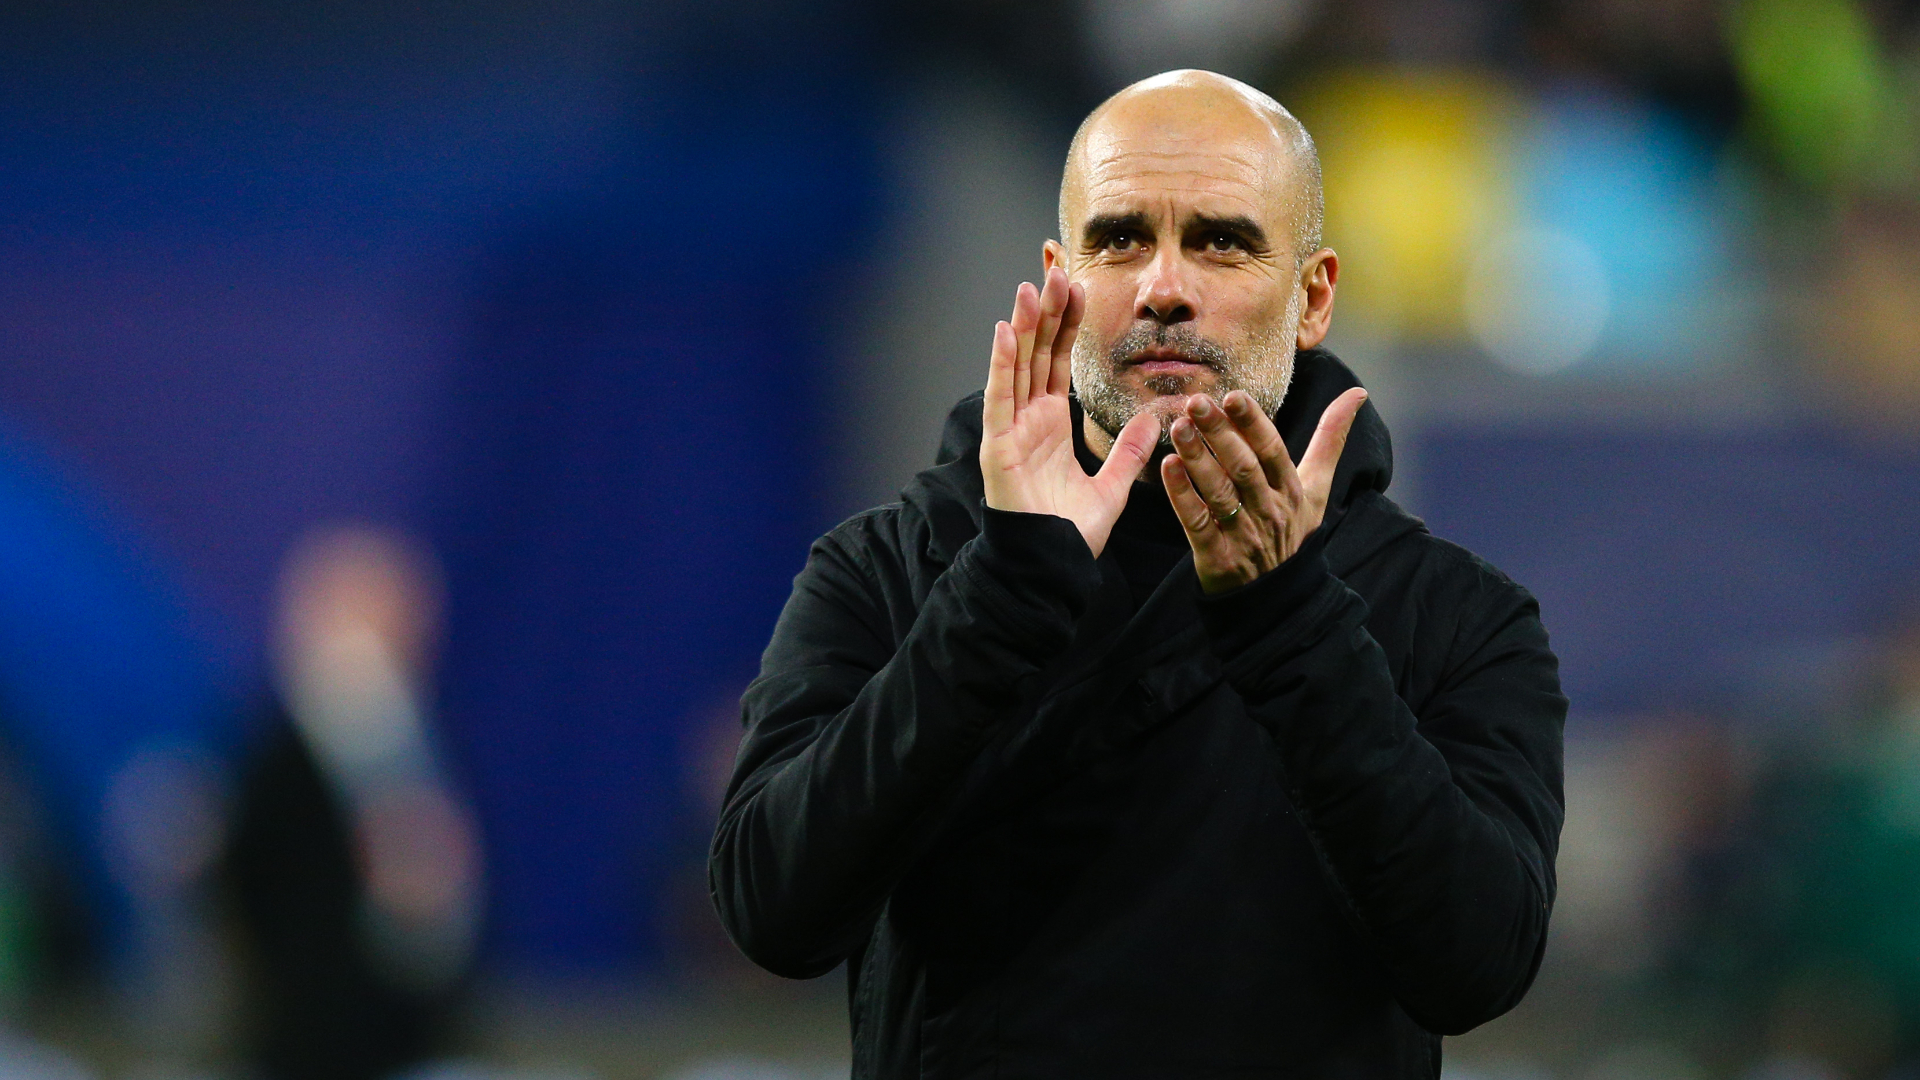 Pep Guardiola was pleased with what he saw despite some people expecting straightforward victory for Manchester City at RB Leipzig